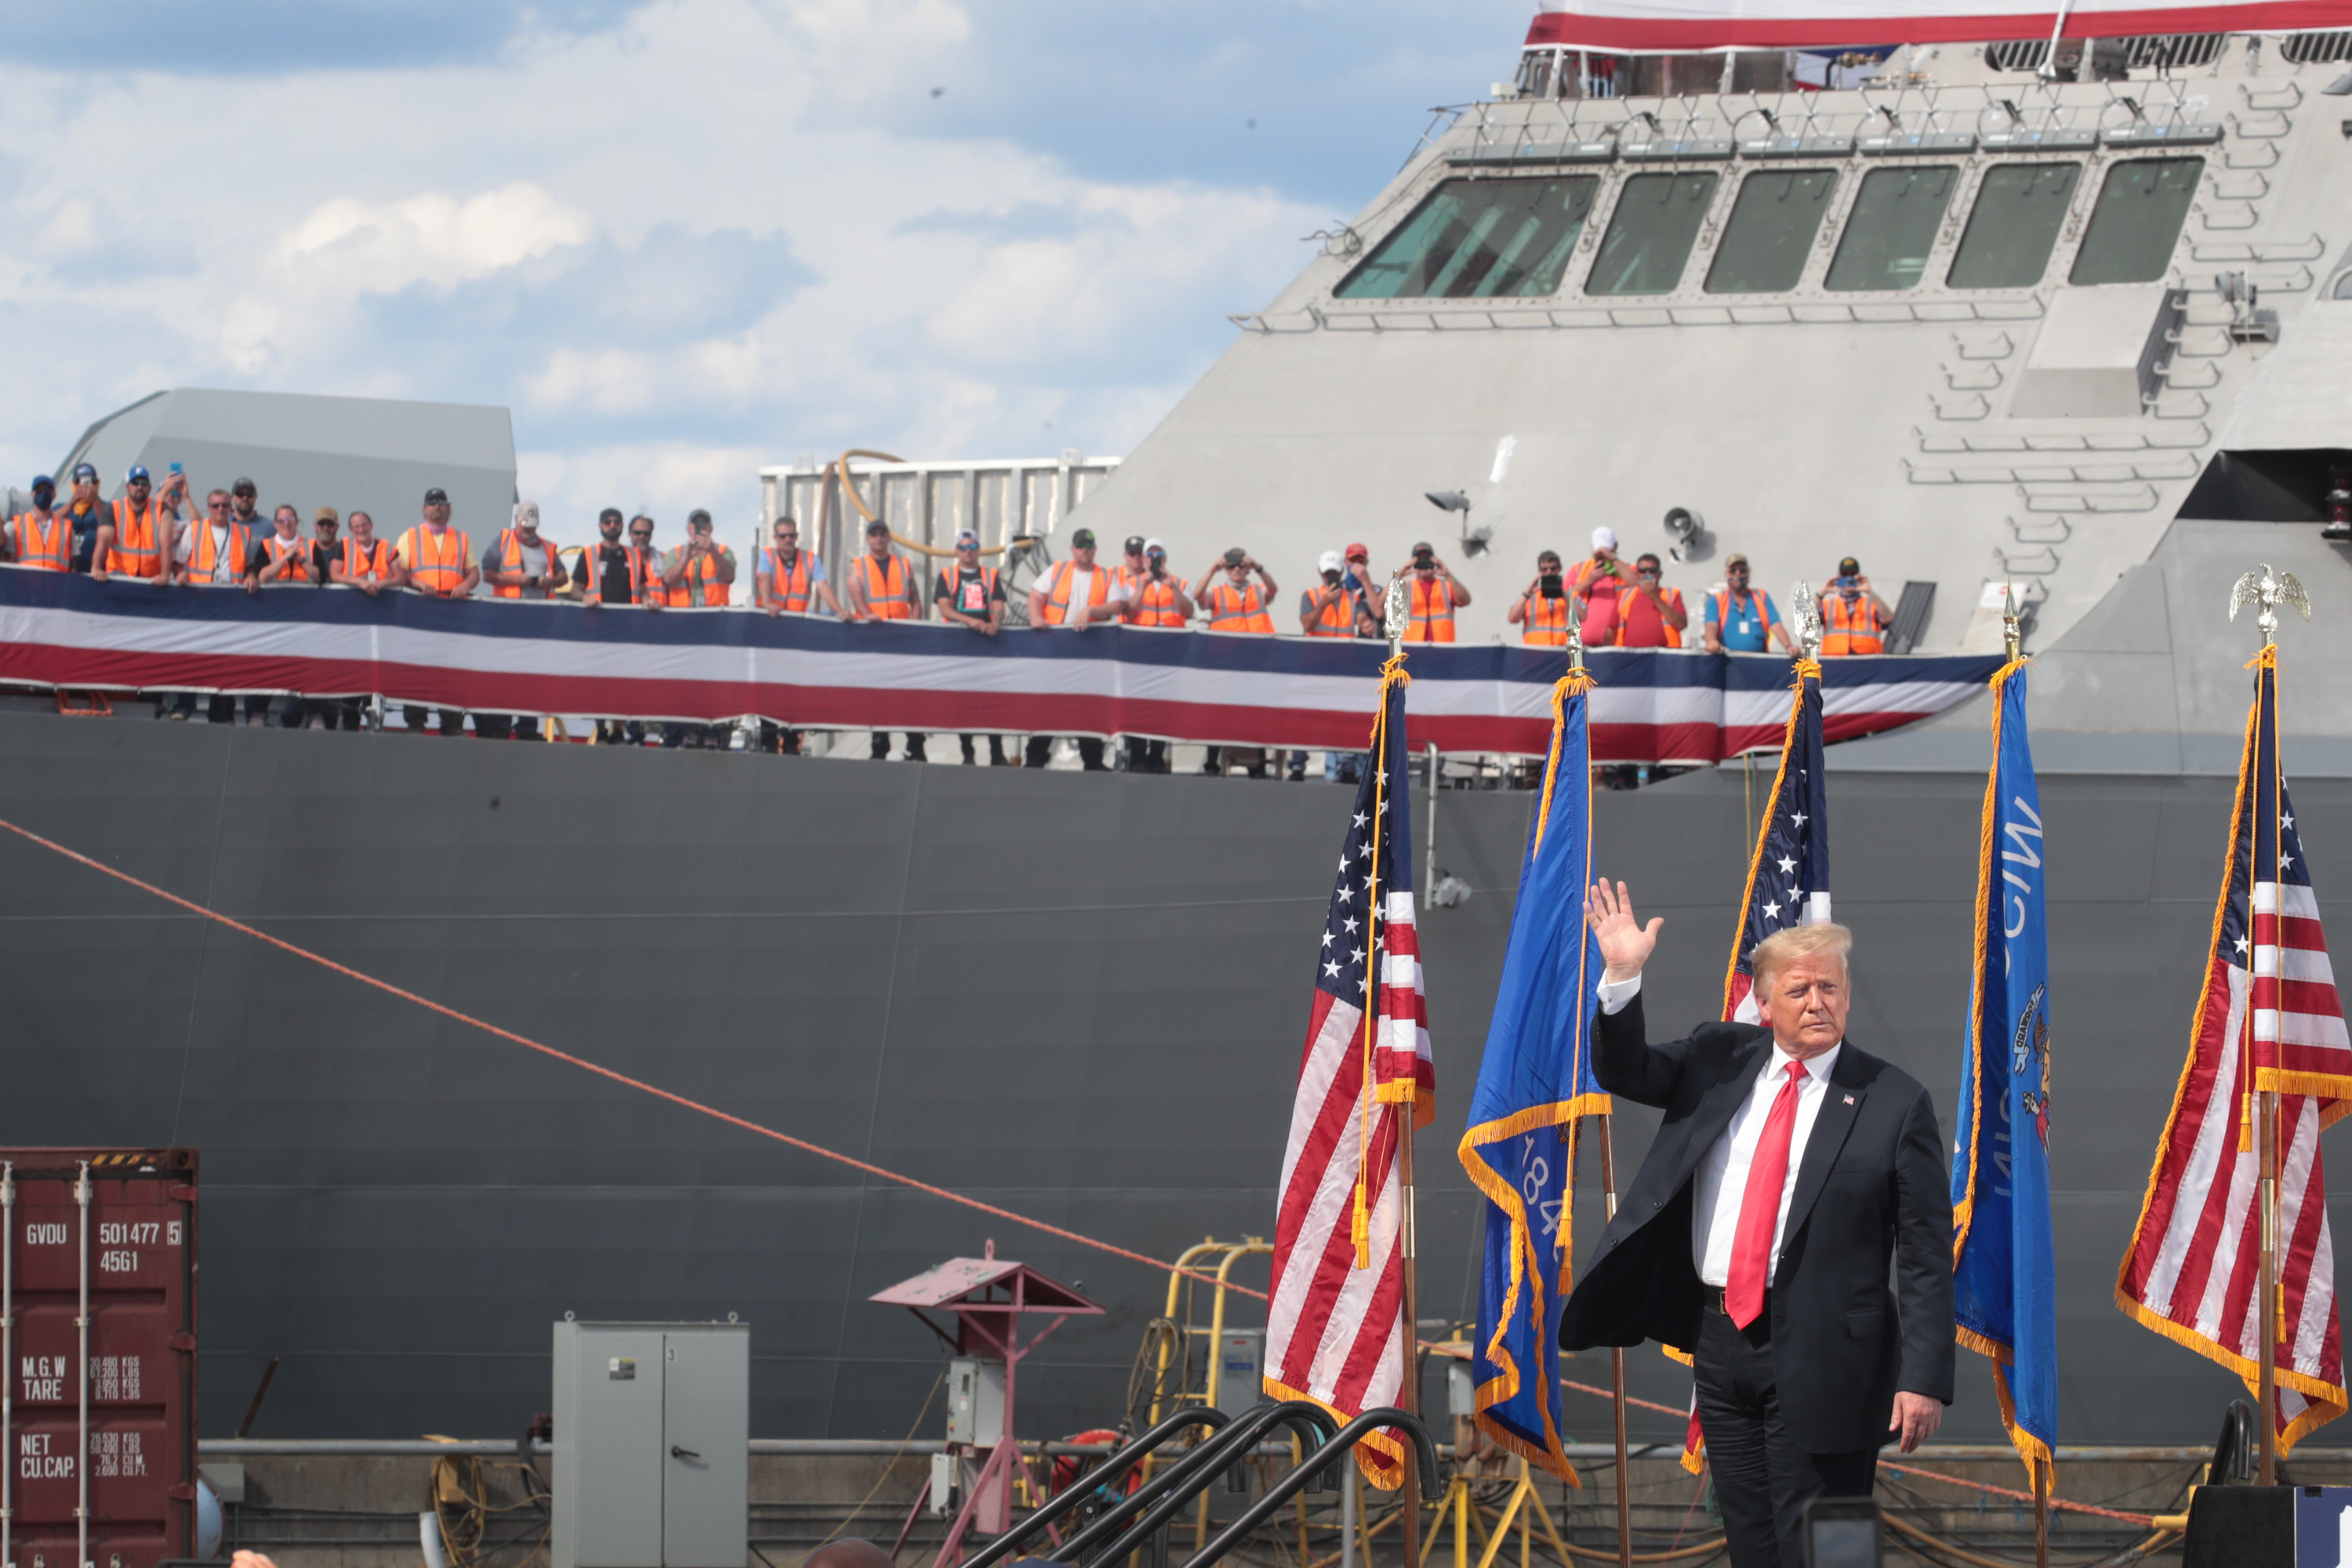 MARINETTE, WISCONSIN - JUNE 25: US President Donald Trump waves after speaking to guests during a visit to the Fincantieri Marinette Marine shipyard on June 25, 2020 in Marinette, Wisconsin. The company was recently awarded a $5.5 billion contract to build ships for the U.S. Navy. (Photo by Scott Olson/Getty Images)